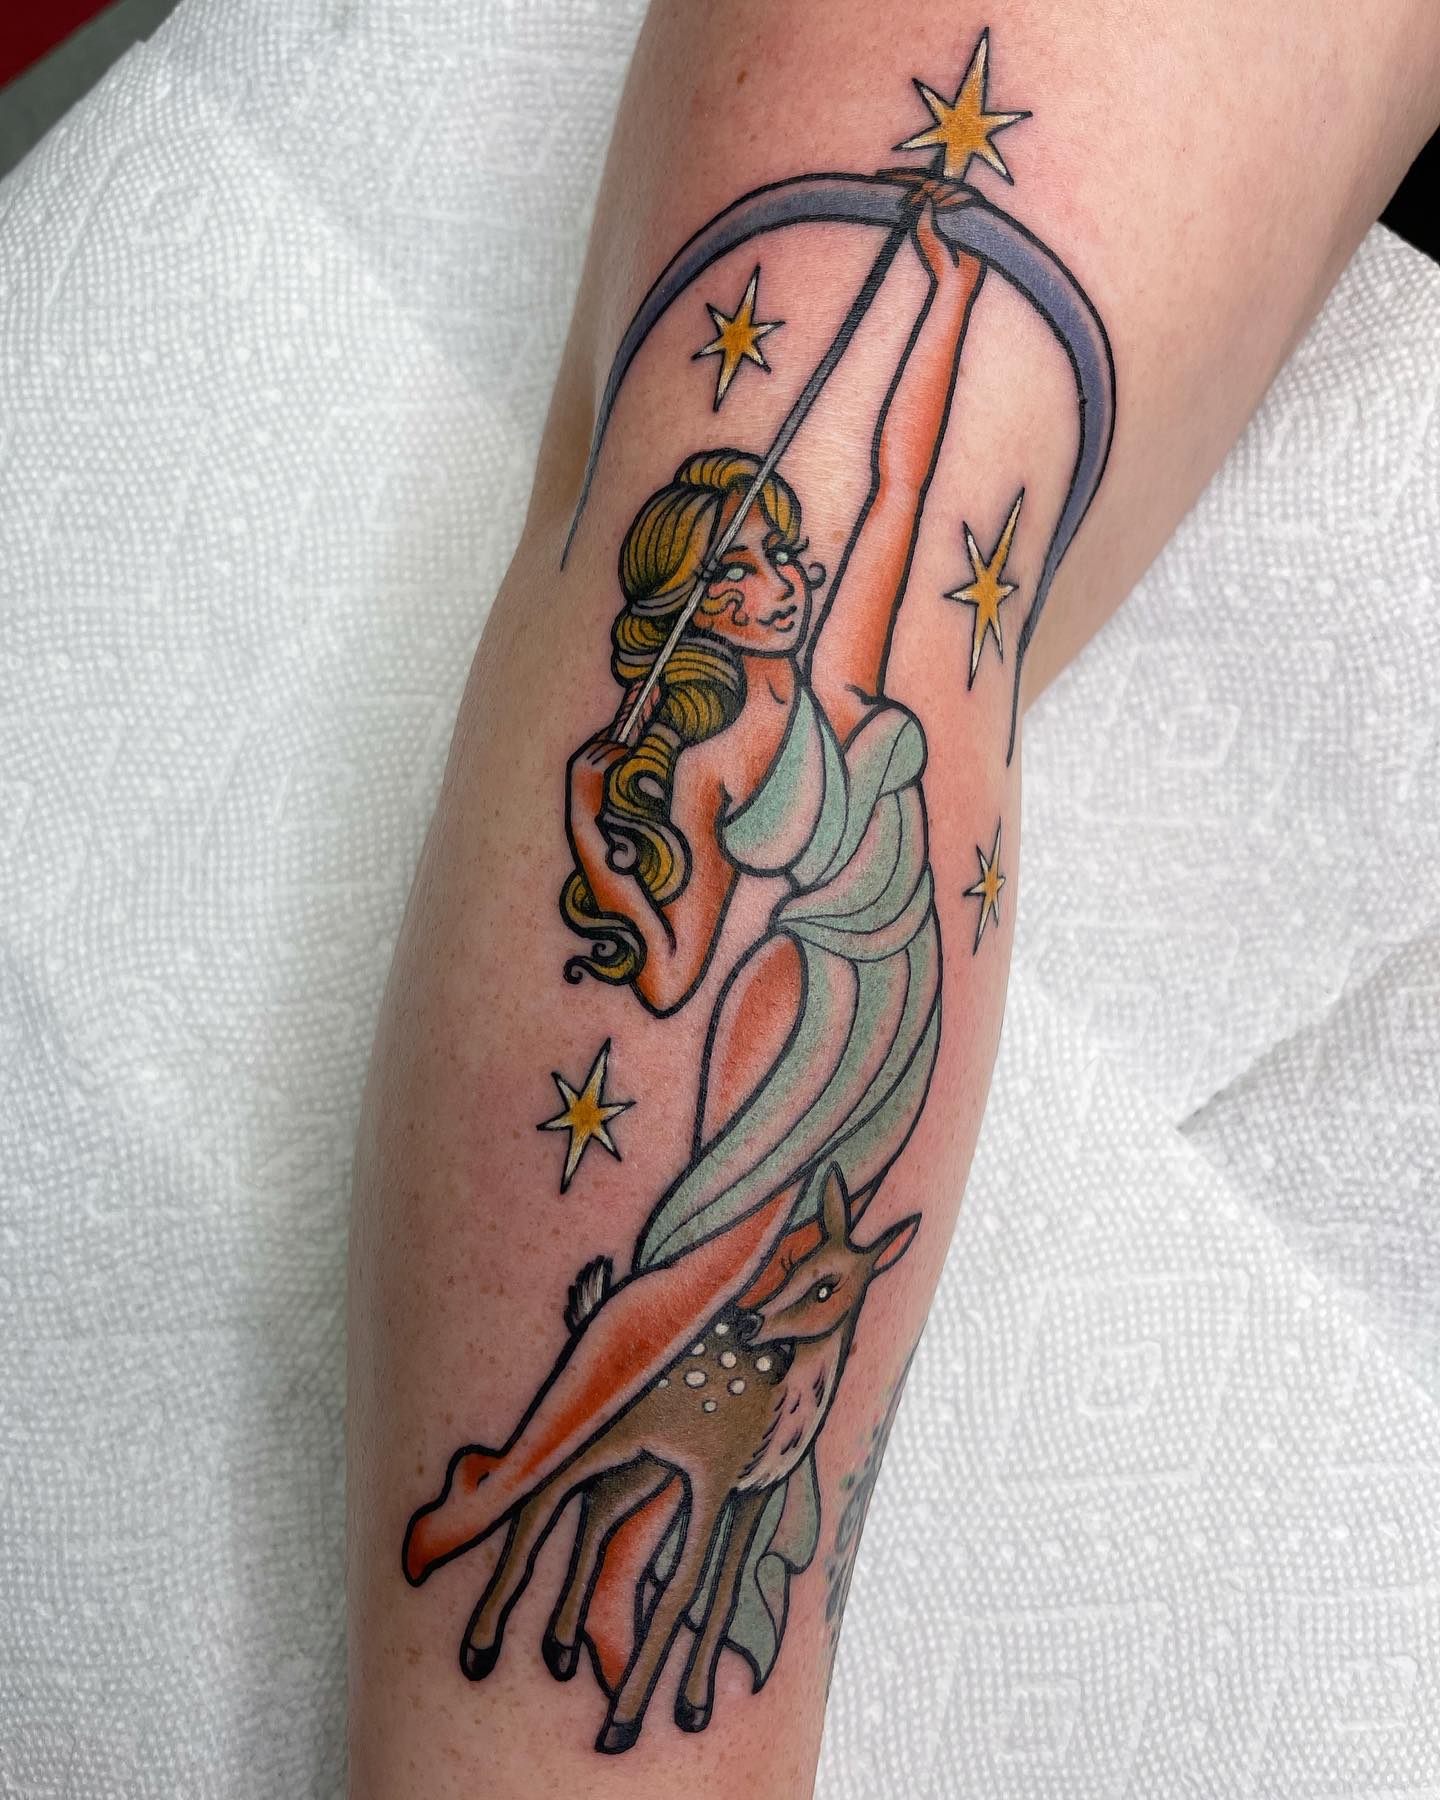 A daughter of Zeus and a favourite goddess, Artemis, is a nice tattoo idea to get.